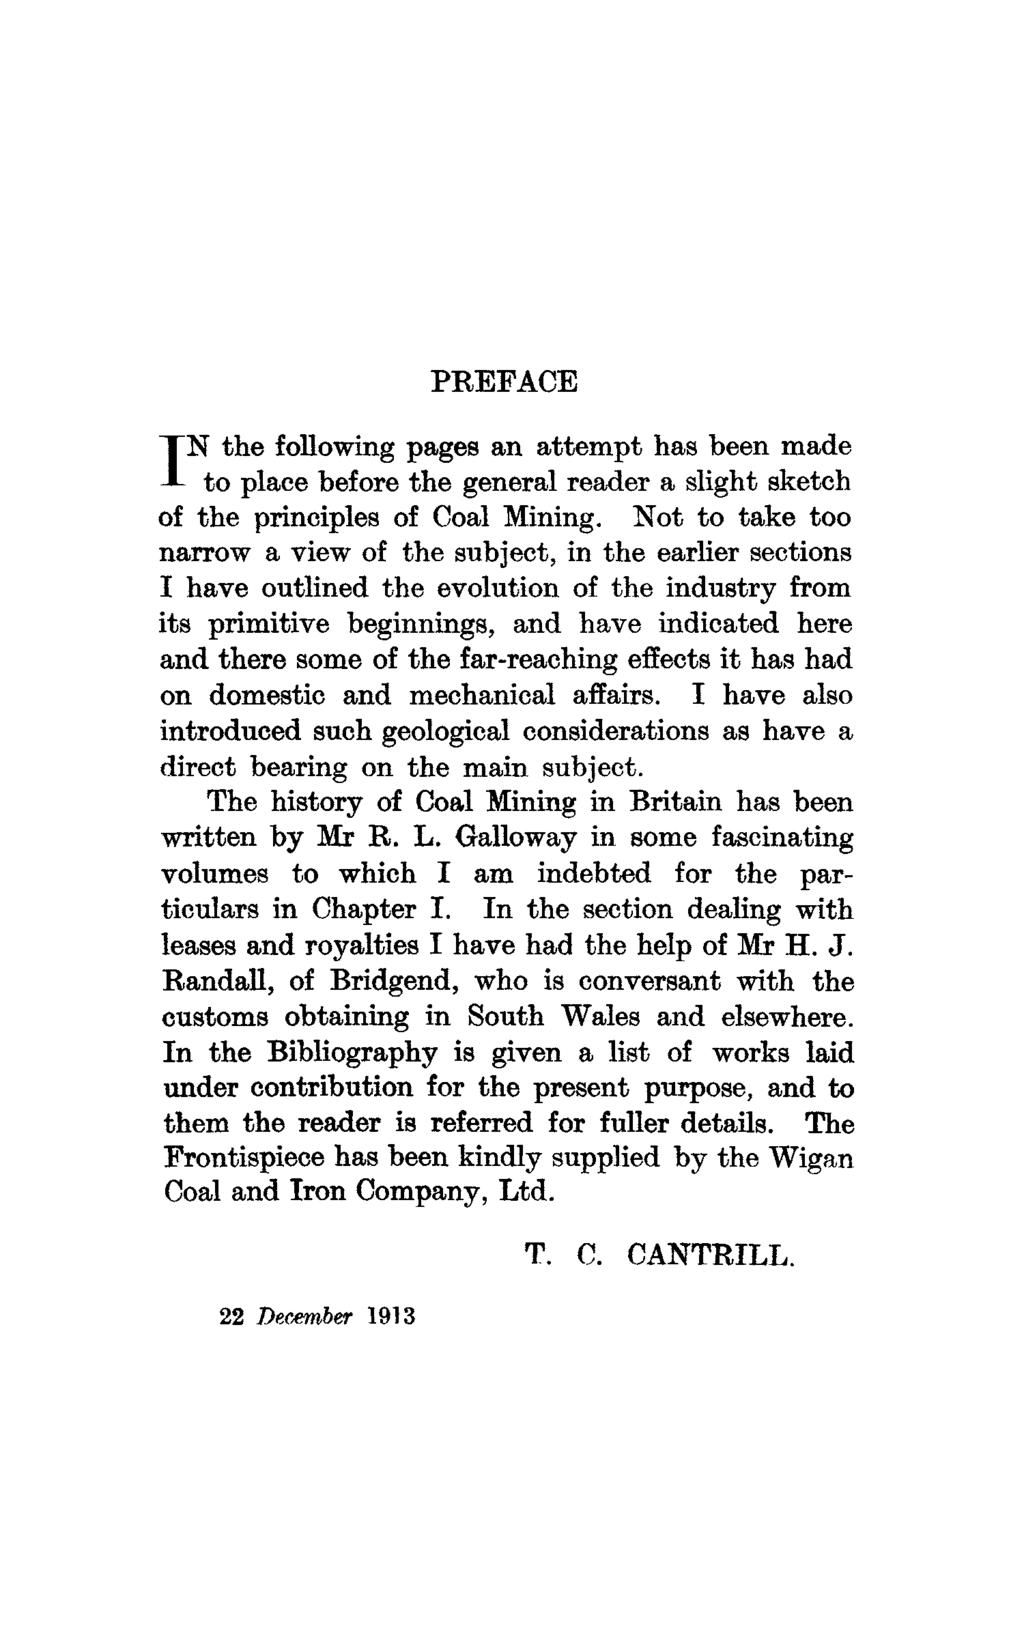 PREFACE IN the following pages an attempt has been made to place before the general reader a slight sketch of the principles of Coal Mining.